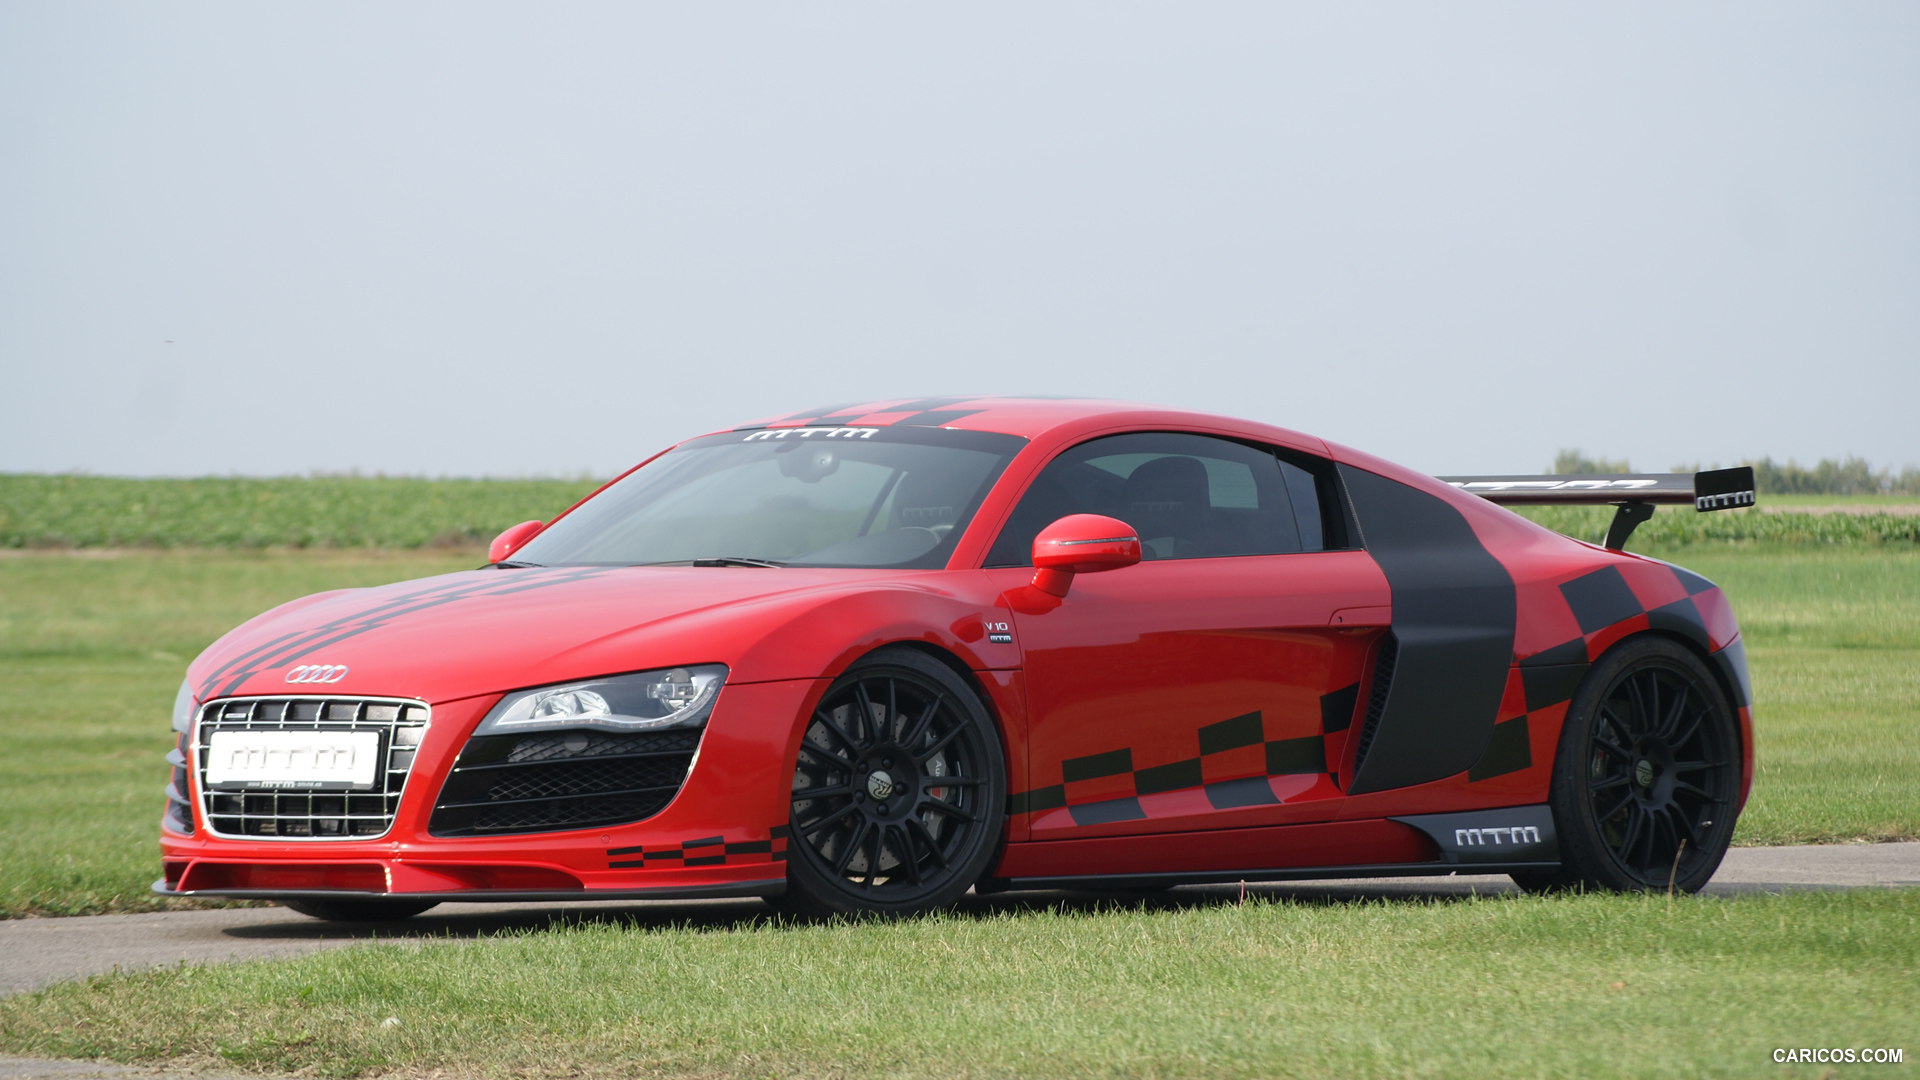 MTM Audi R8 V10 (2013) Coupe - Front, #14 of 21